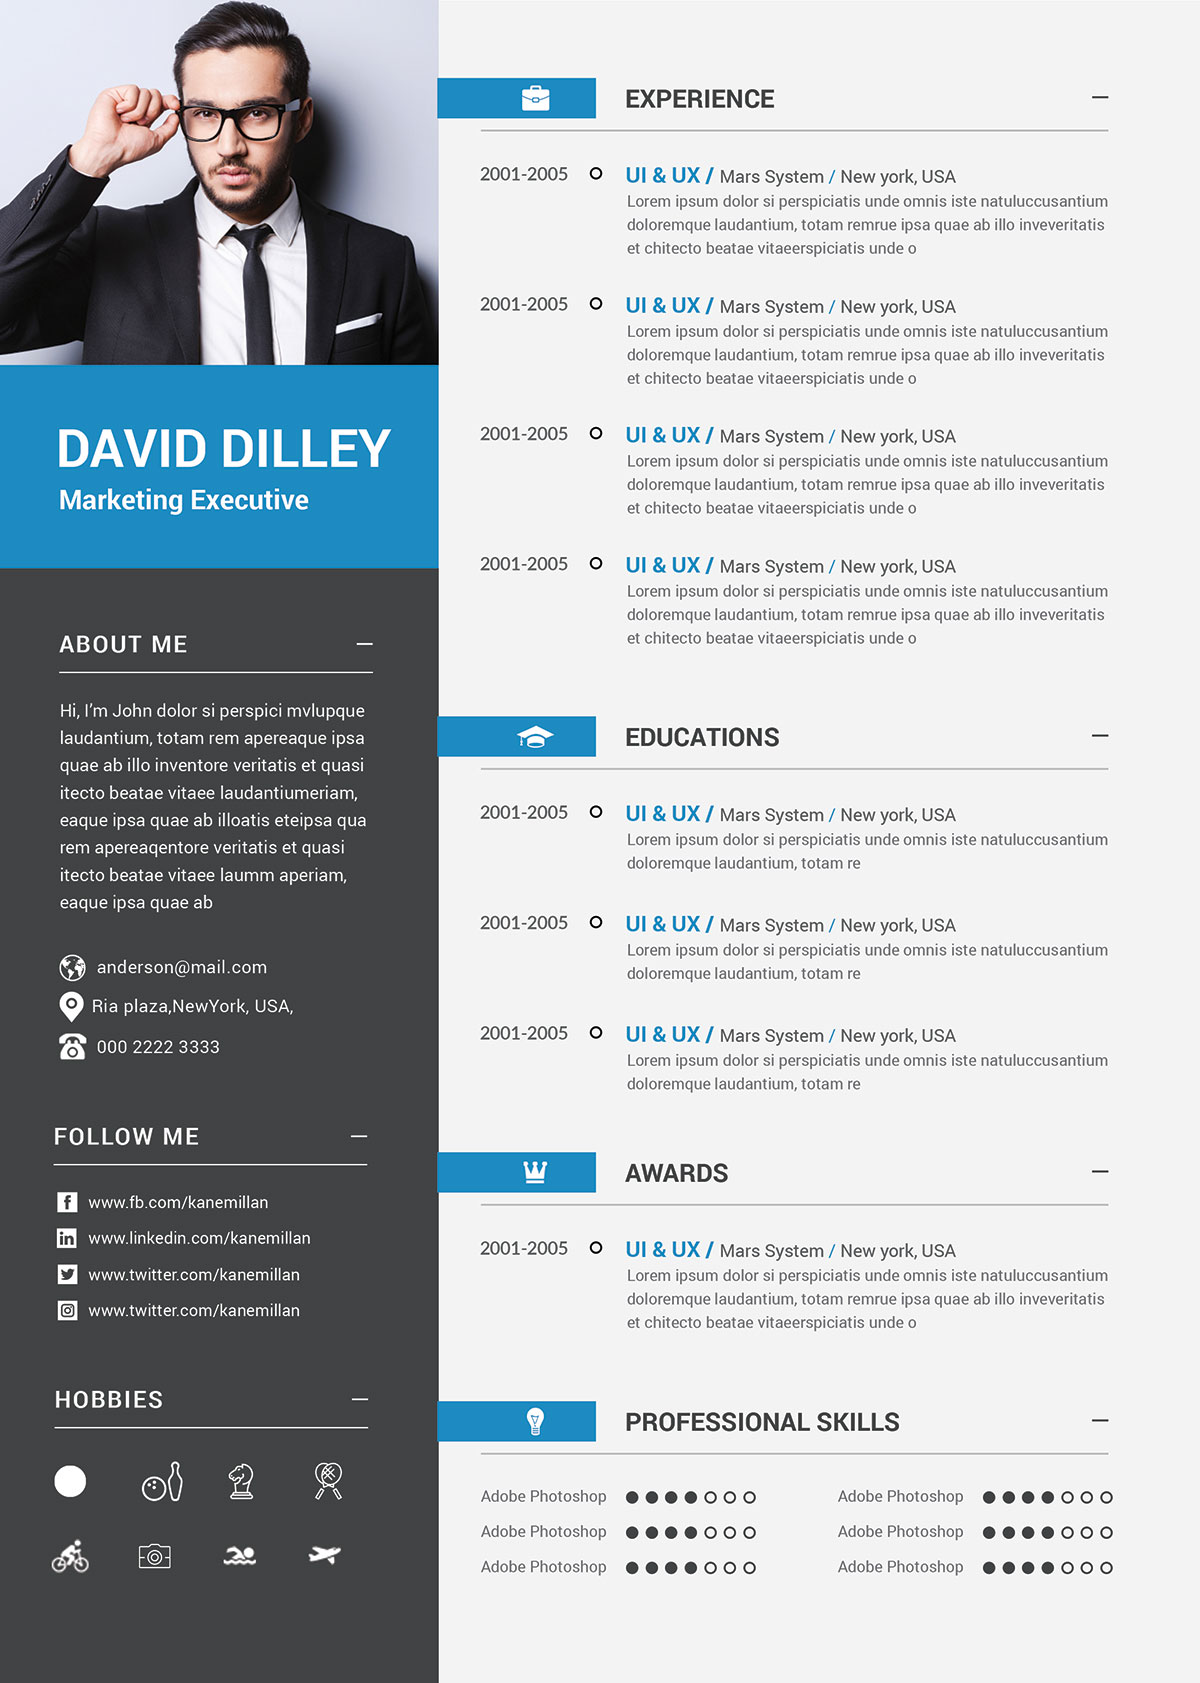 Image Of Curriculum Vitae Professional CV Template In Word Format 